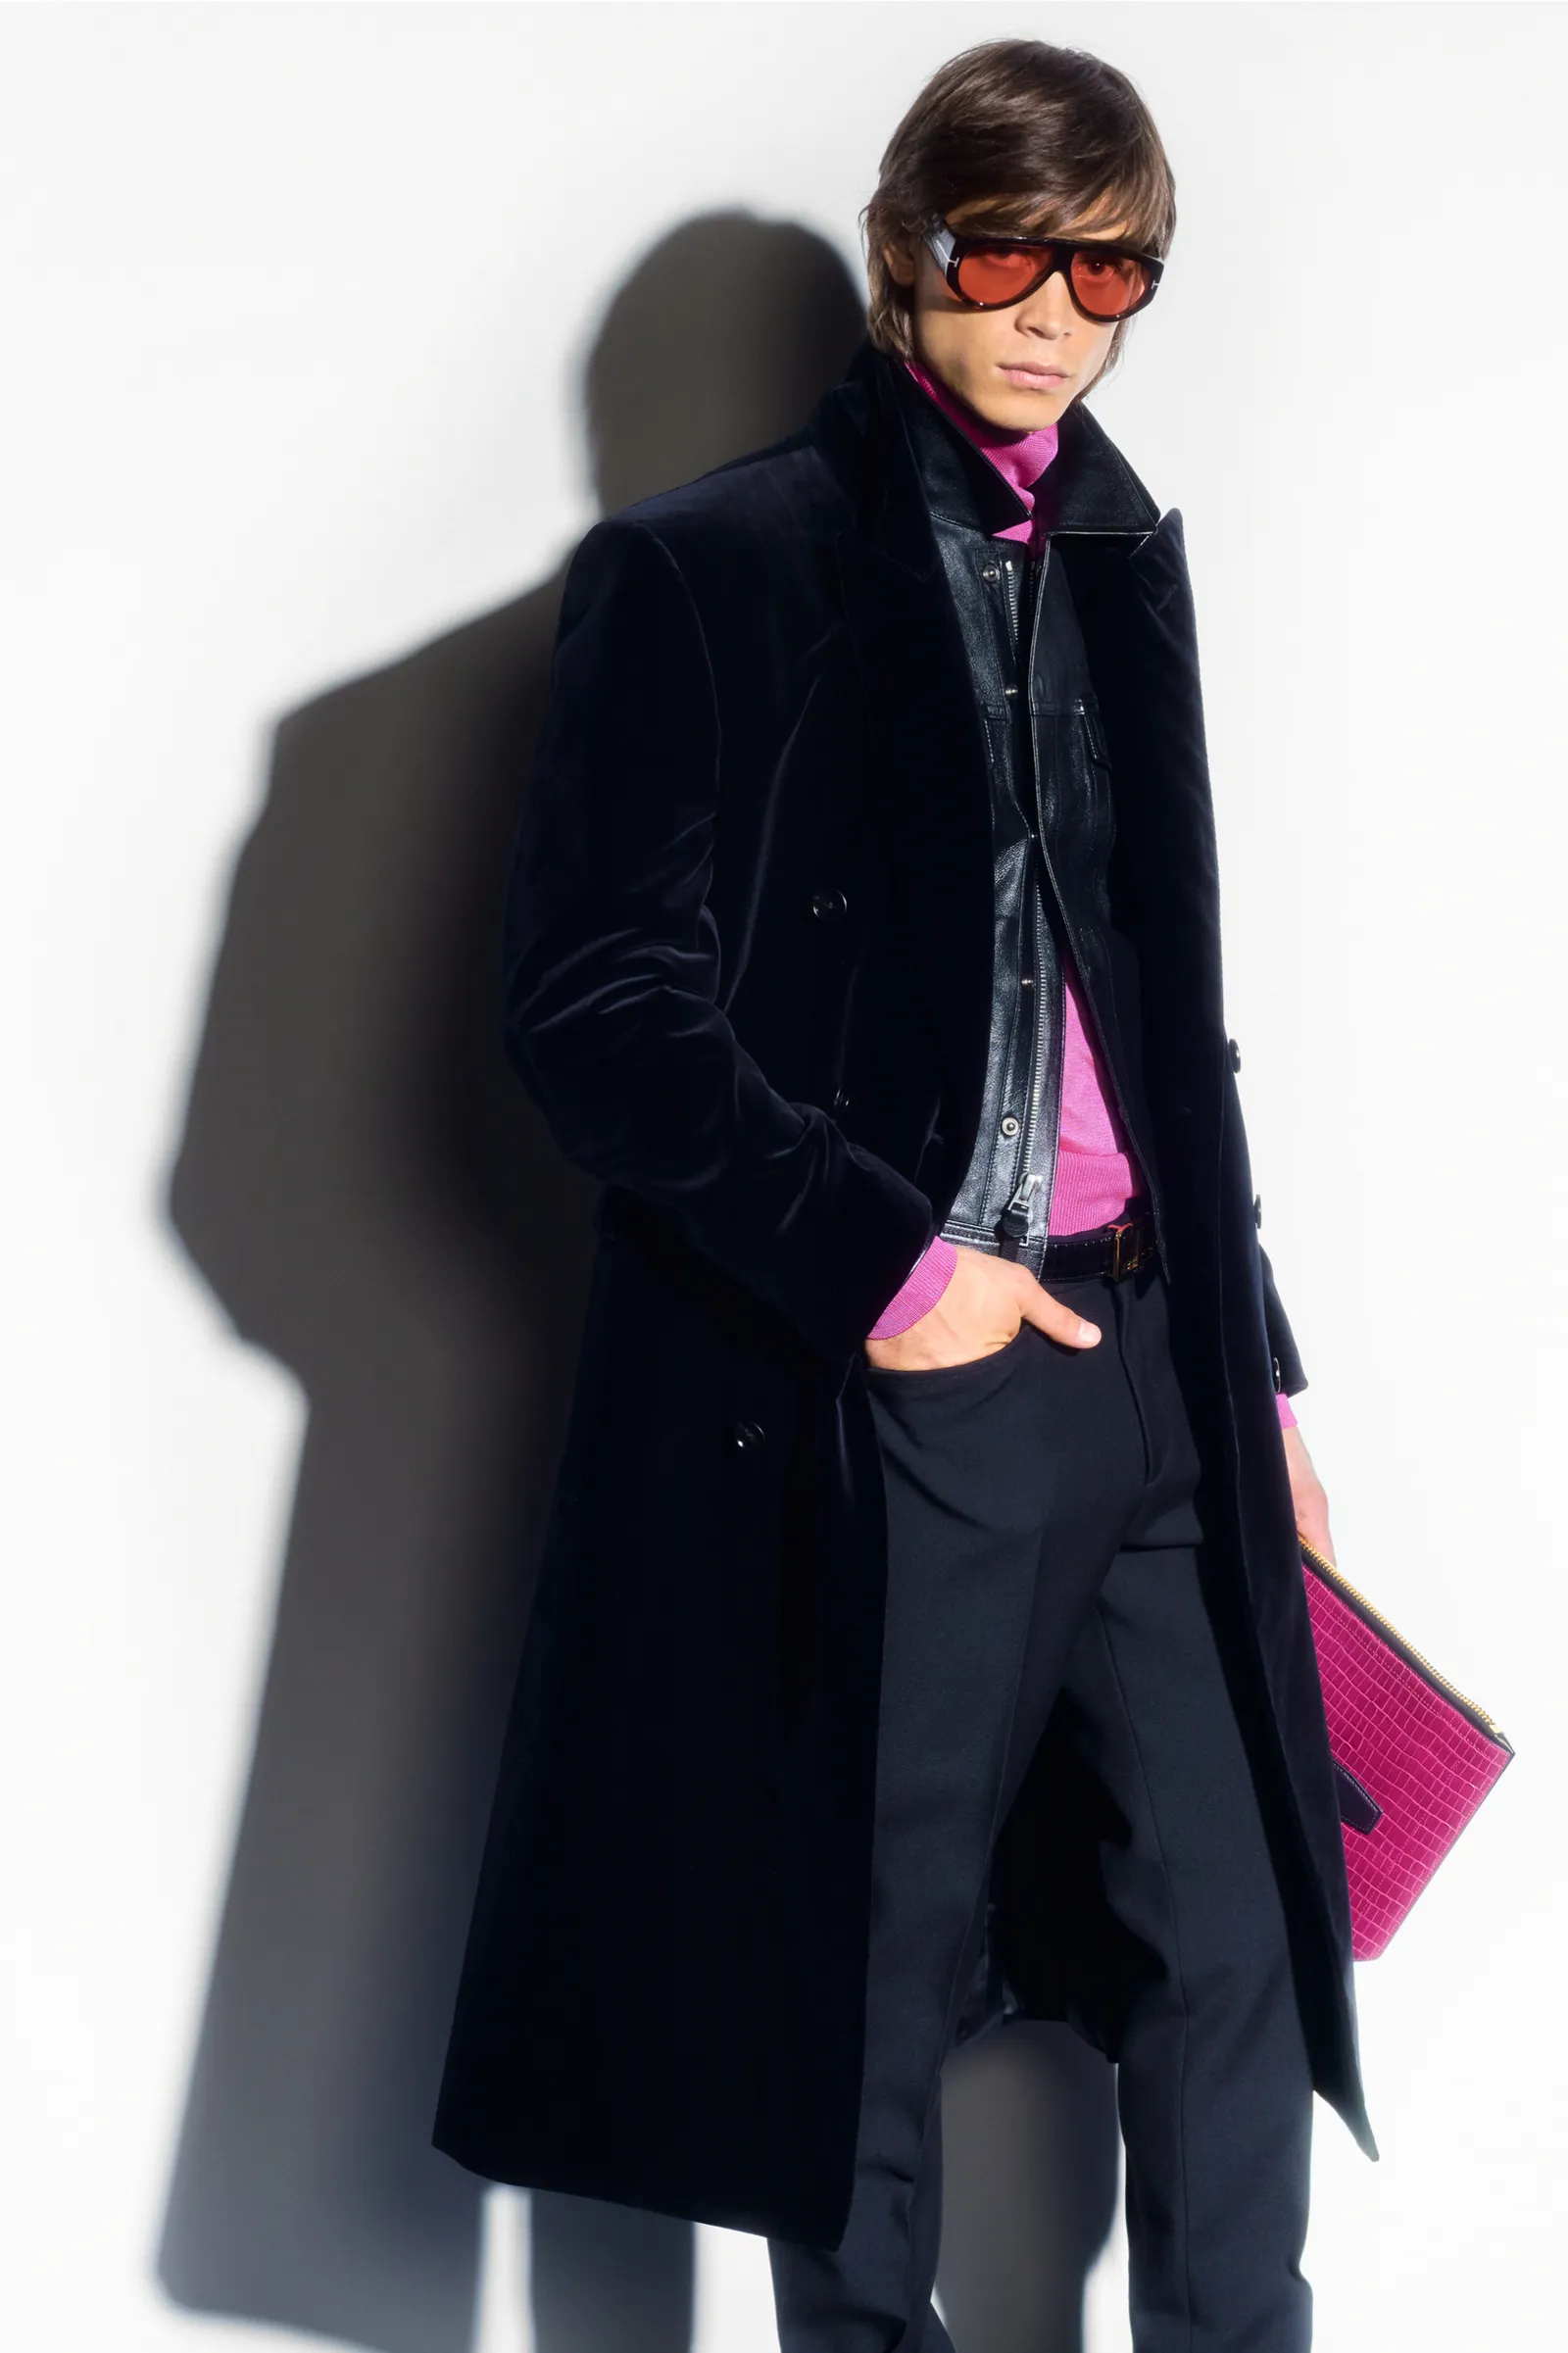 00010-tom-ford-fall-22-mens-nyc-credit-brand.png